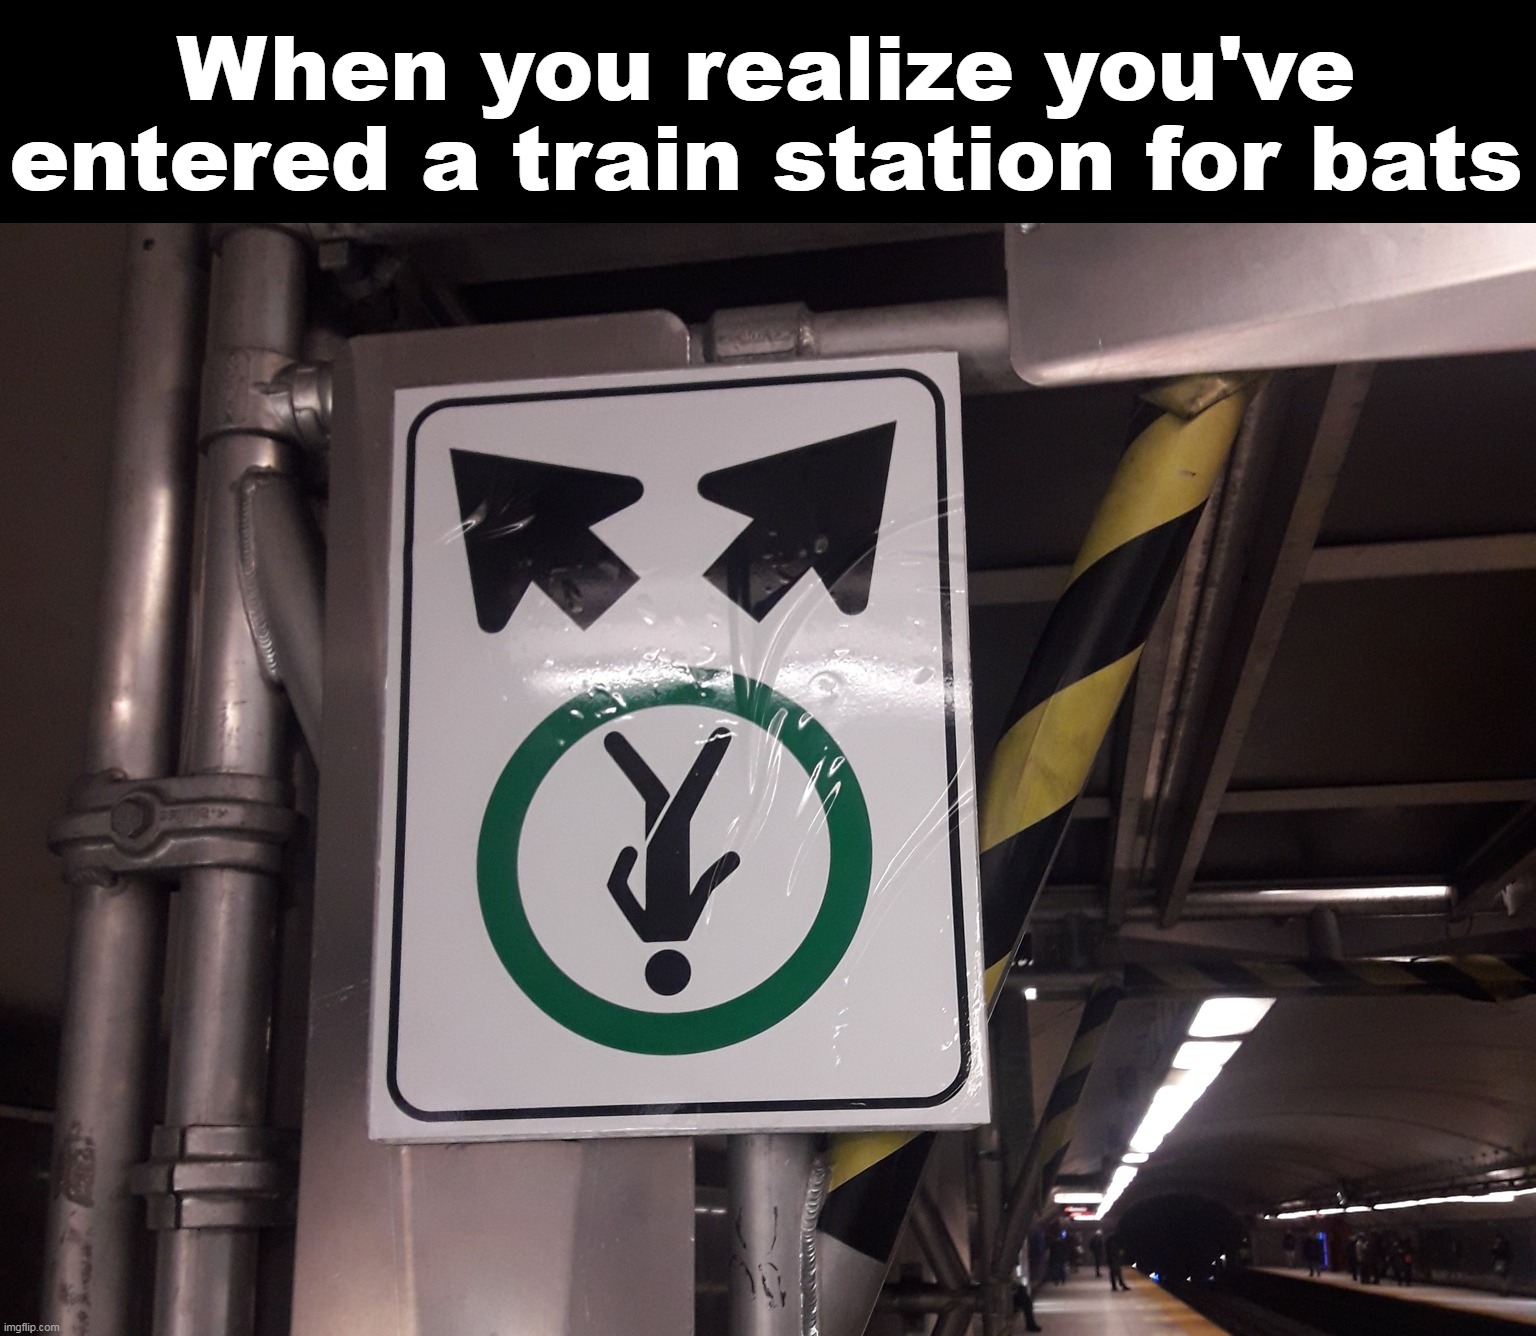 When you realize you've entered a train station for bats | image tagged in meme,memes,humor,signs,funny | made w/ Imgflip meme maker